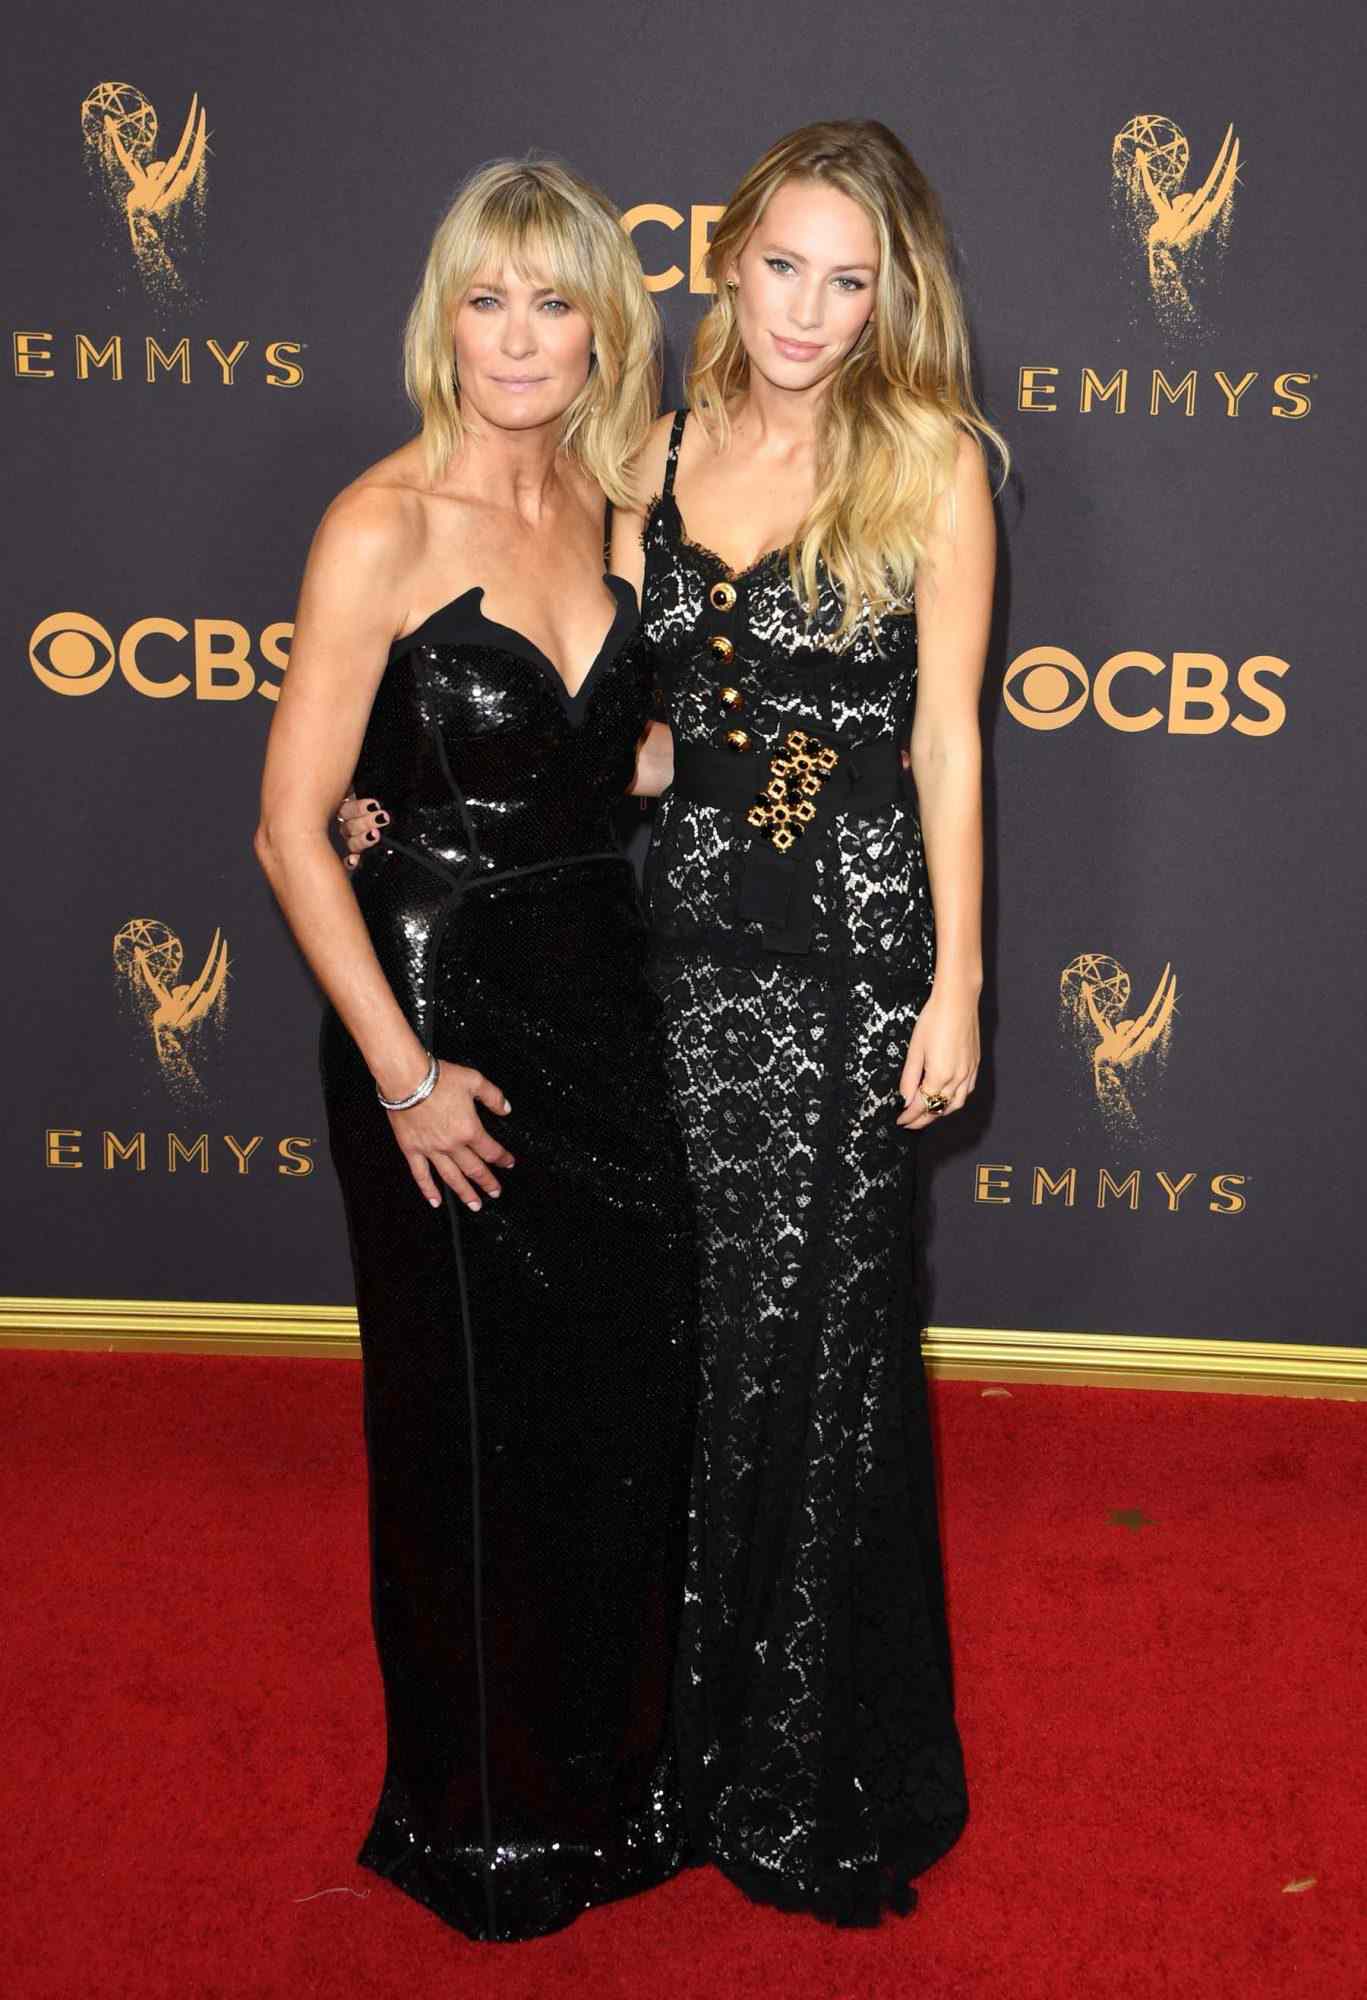 US-ENTERTAINMENT-TELEVISION-EMMYS-ARRIVALS